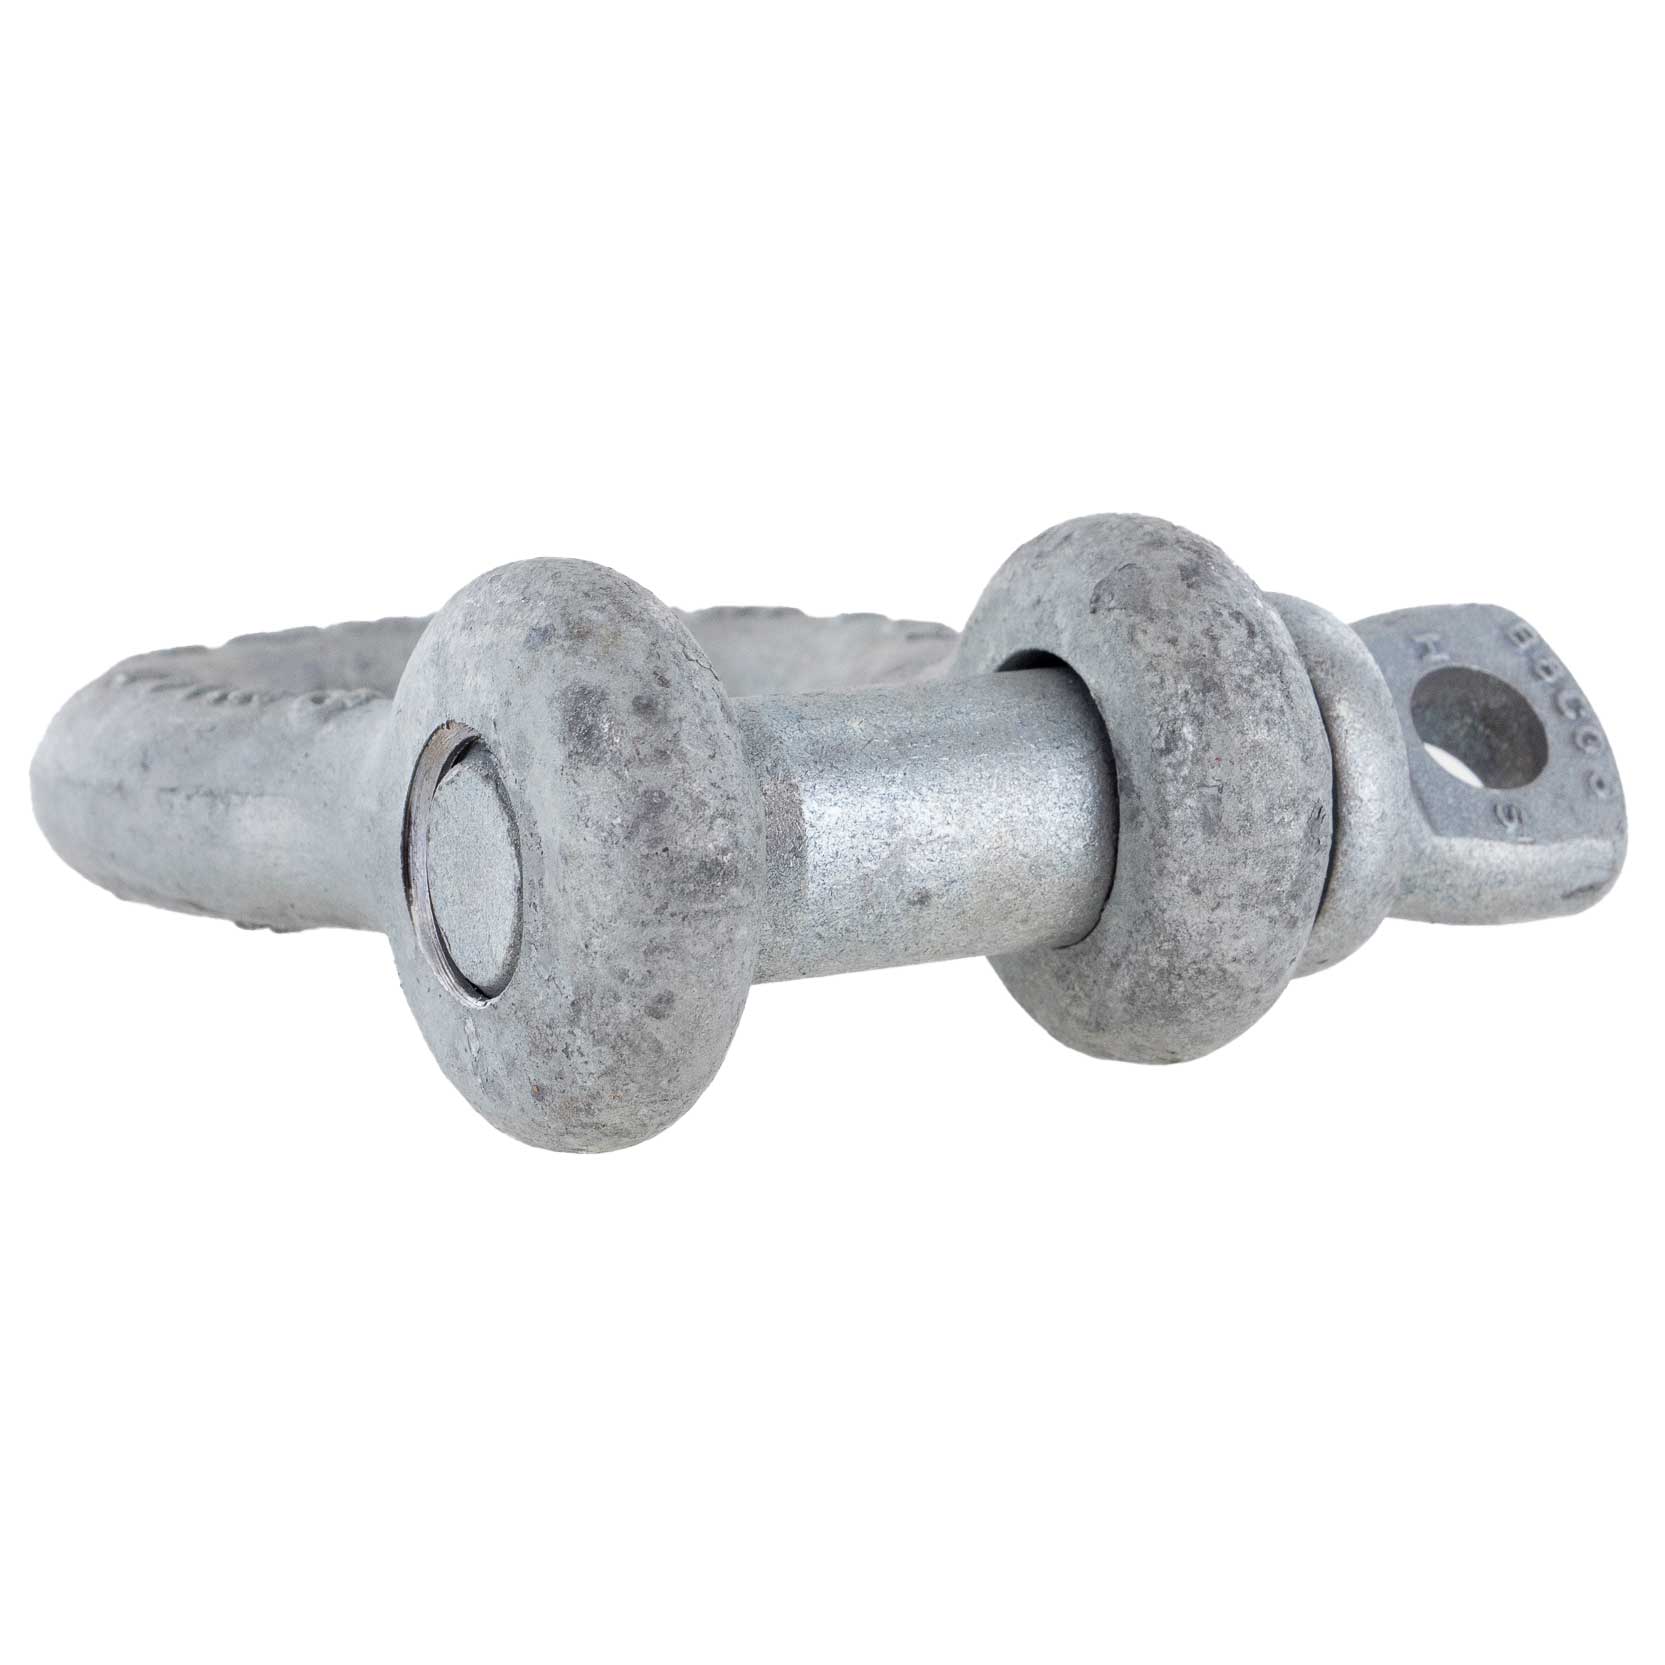 3/4" Crosby® Alloy Screw Pin Anchor Shackle | G-209A - 7 Ton side view